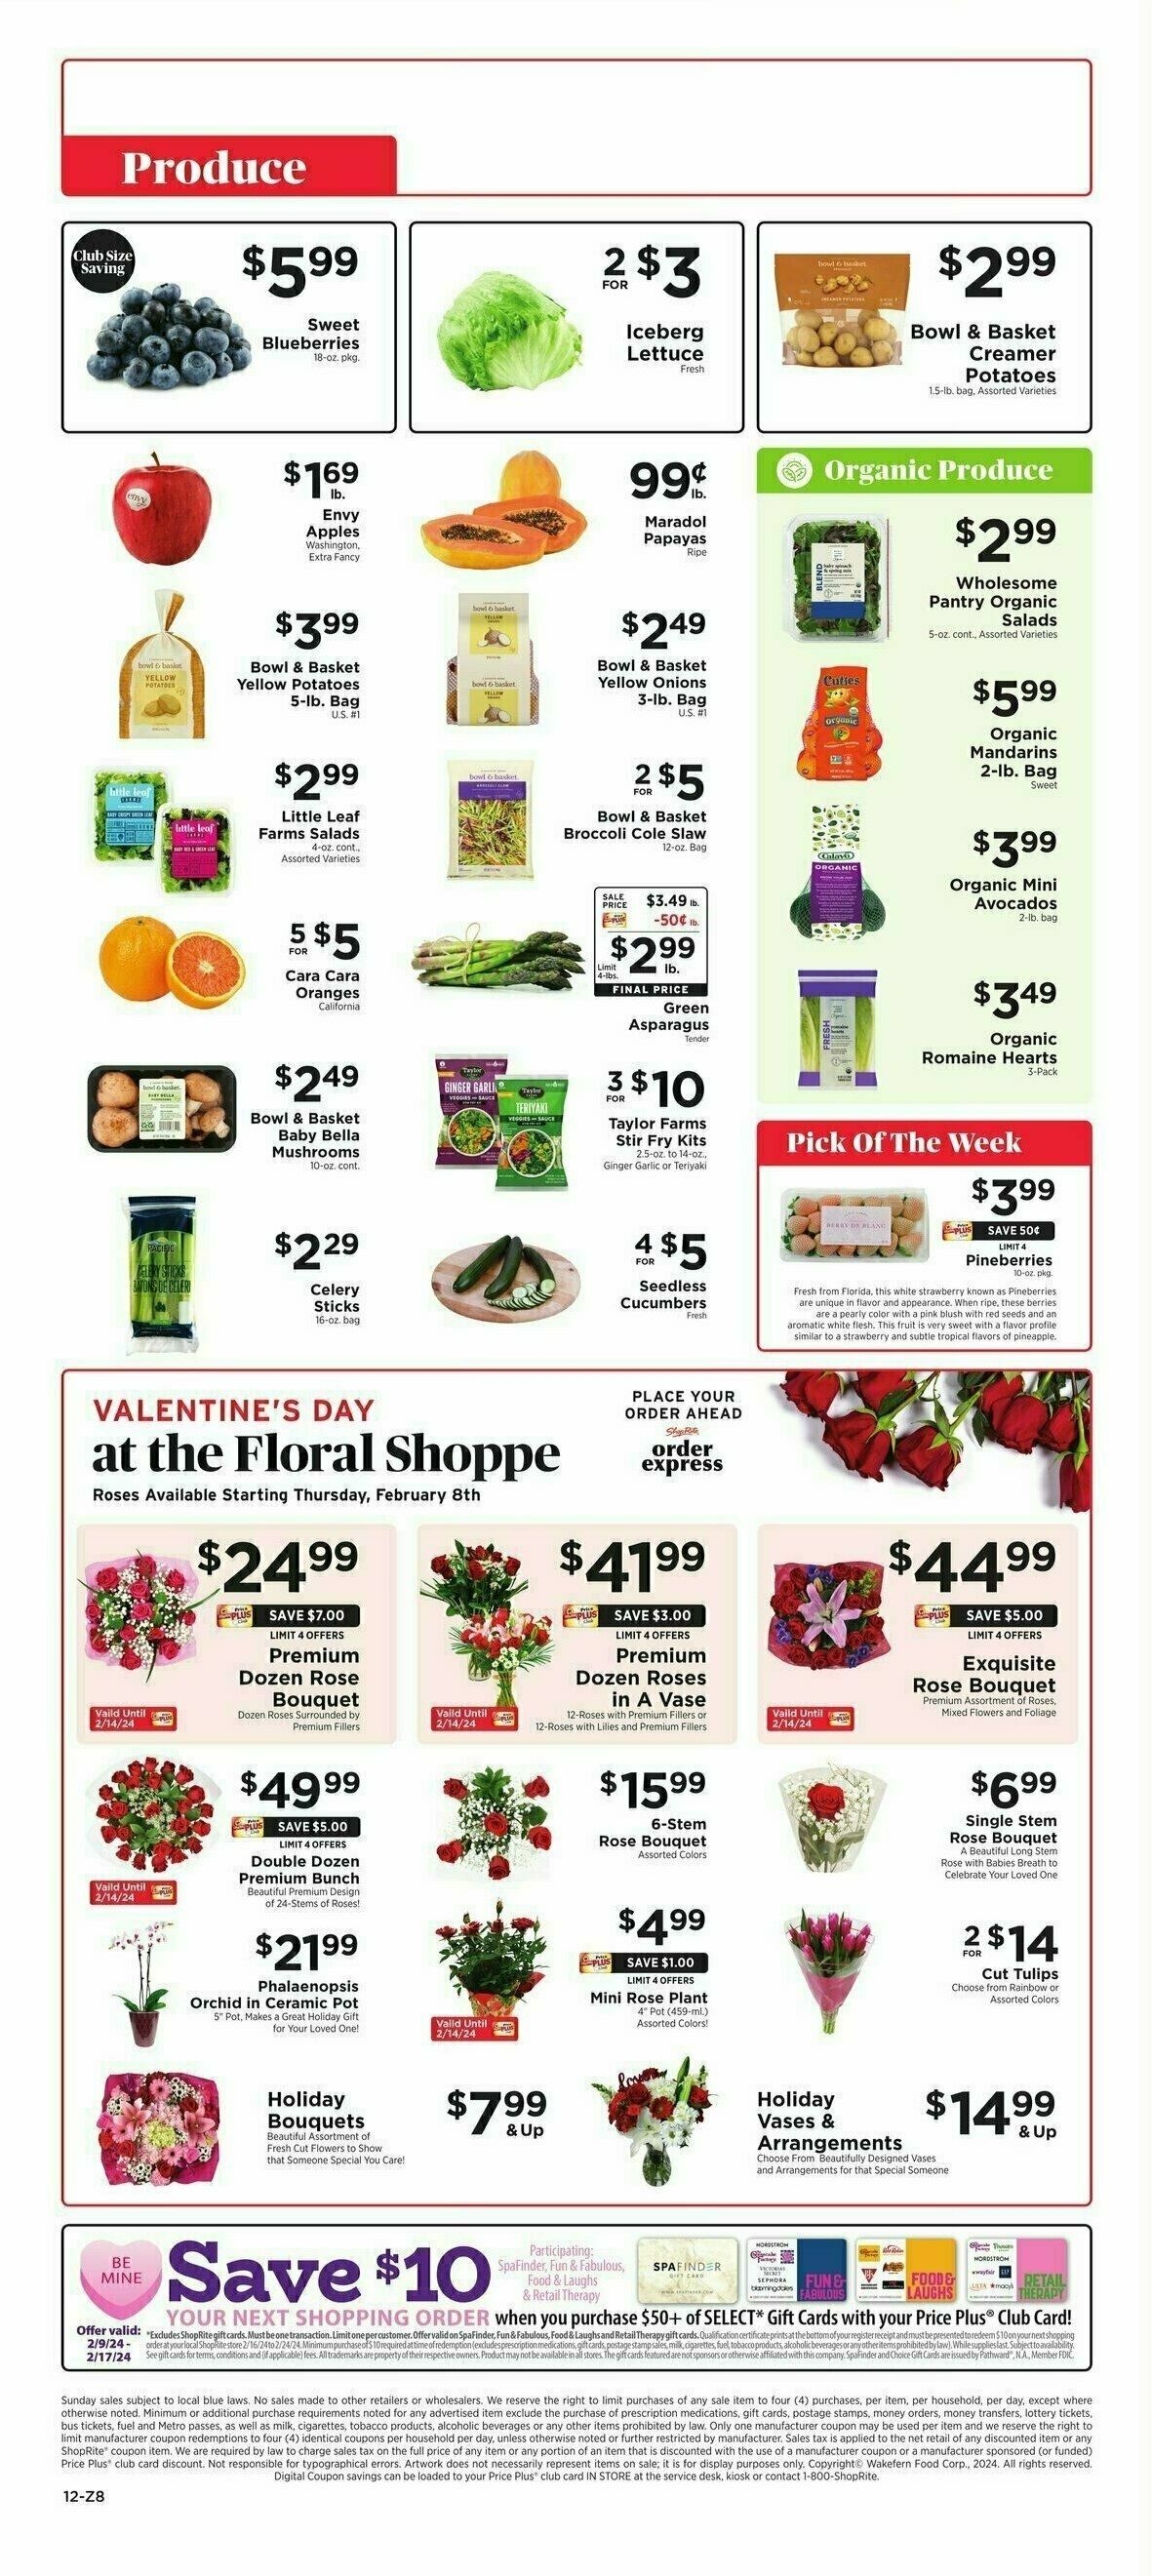 ShopRite Weekly Ad from February 9